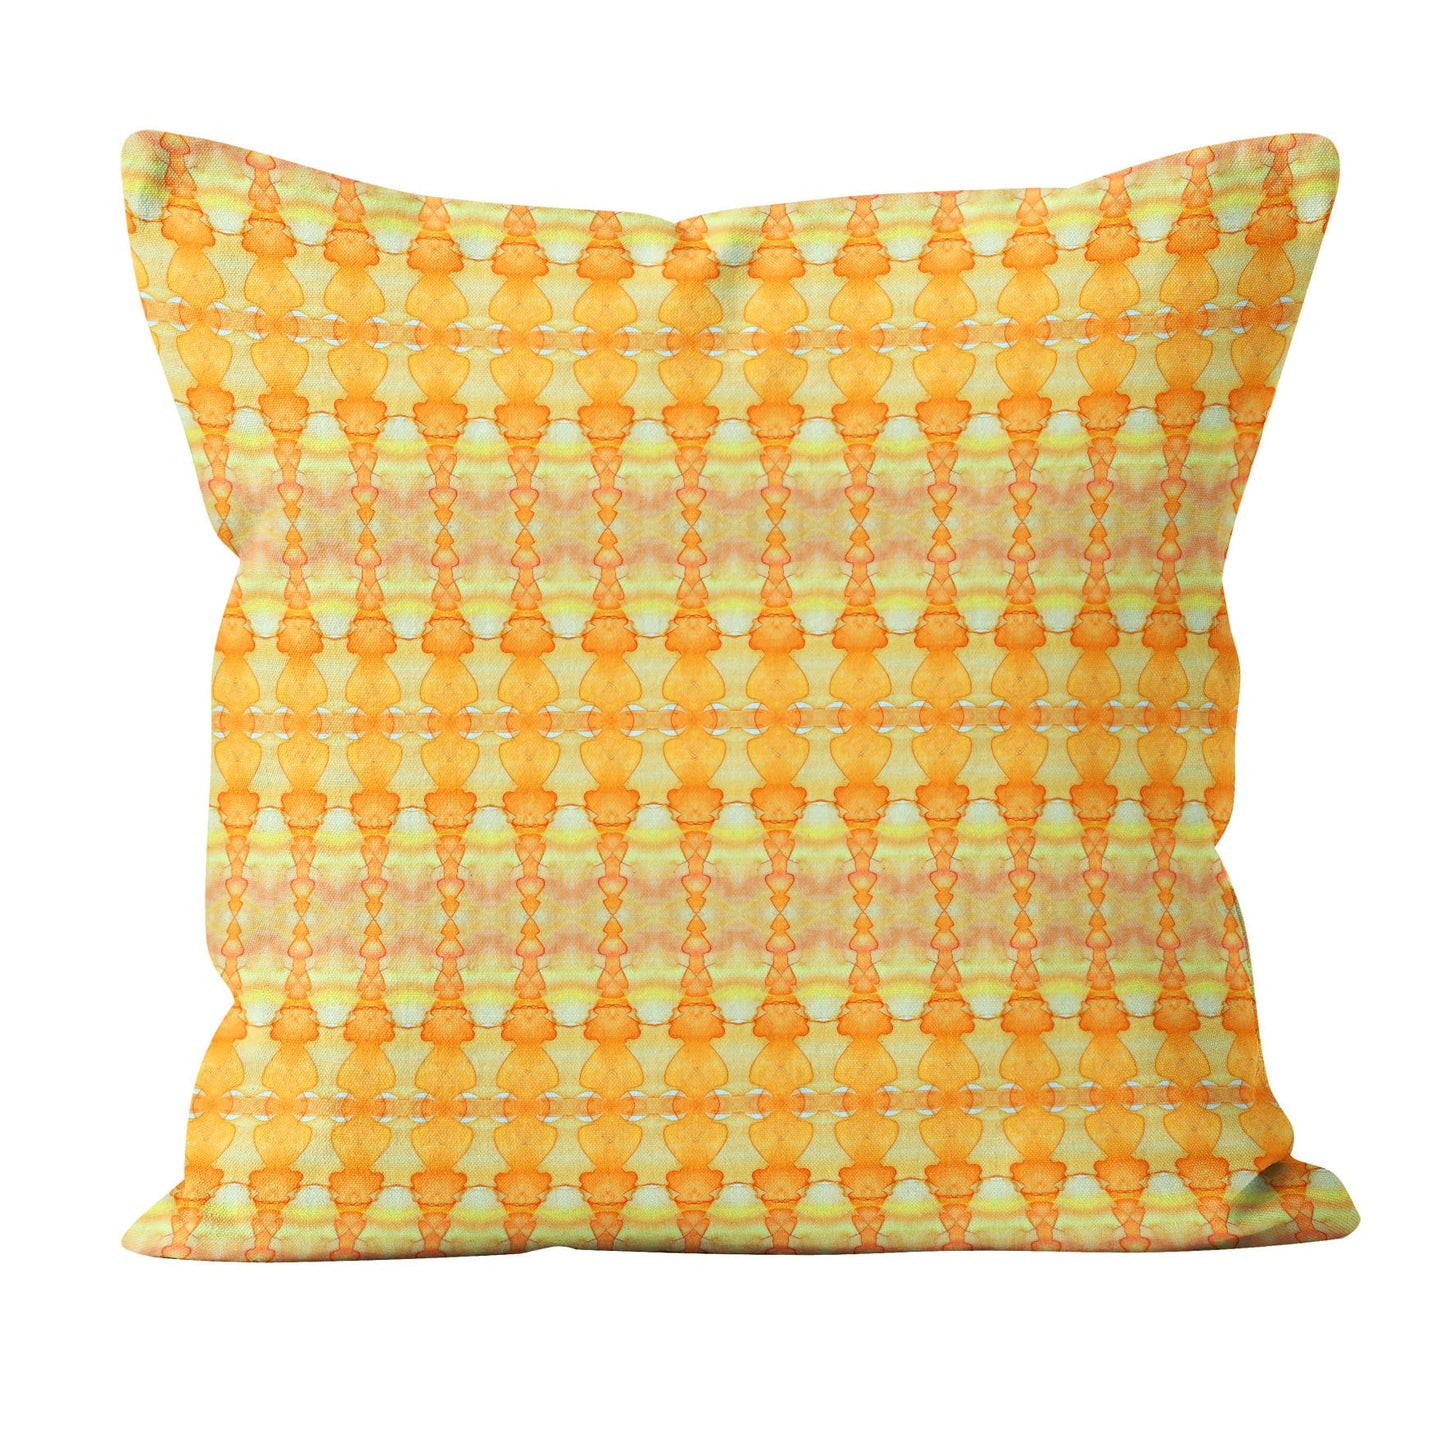 Square throw pillow featuring hand-painted pattern in yellow and orange